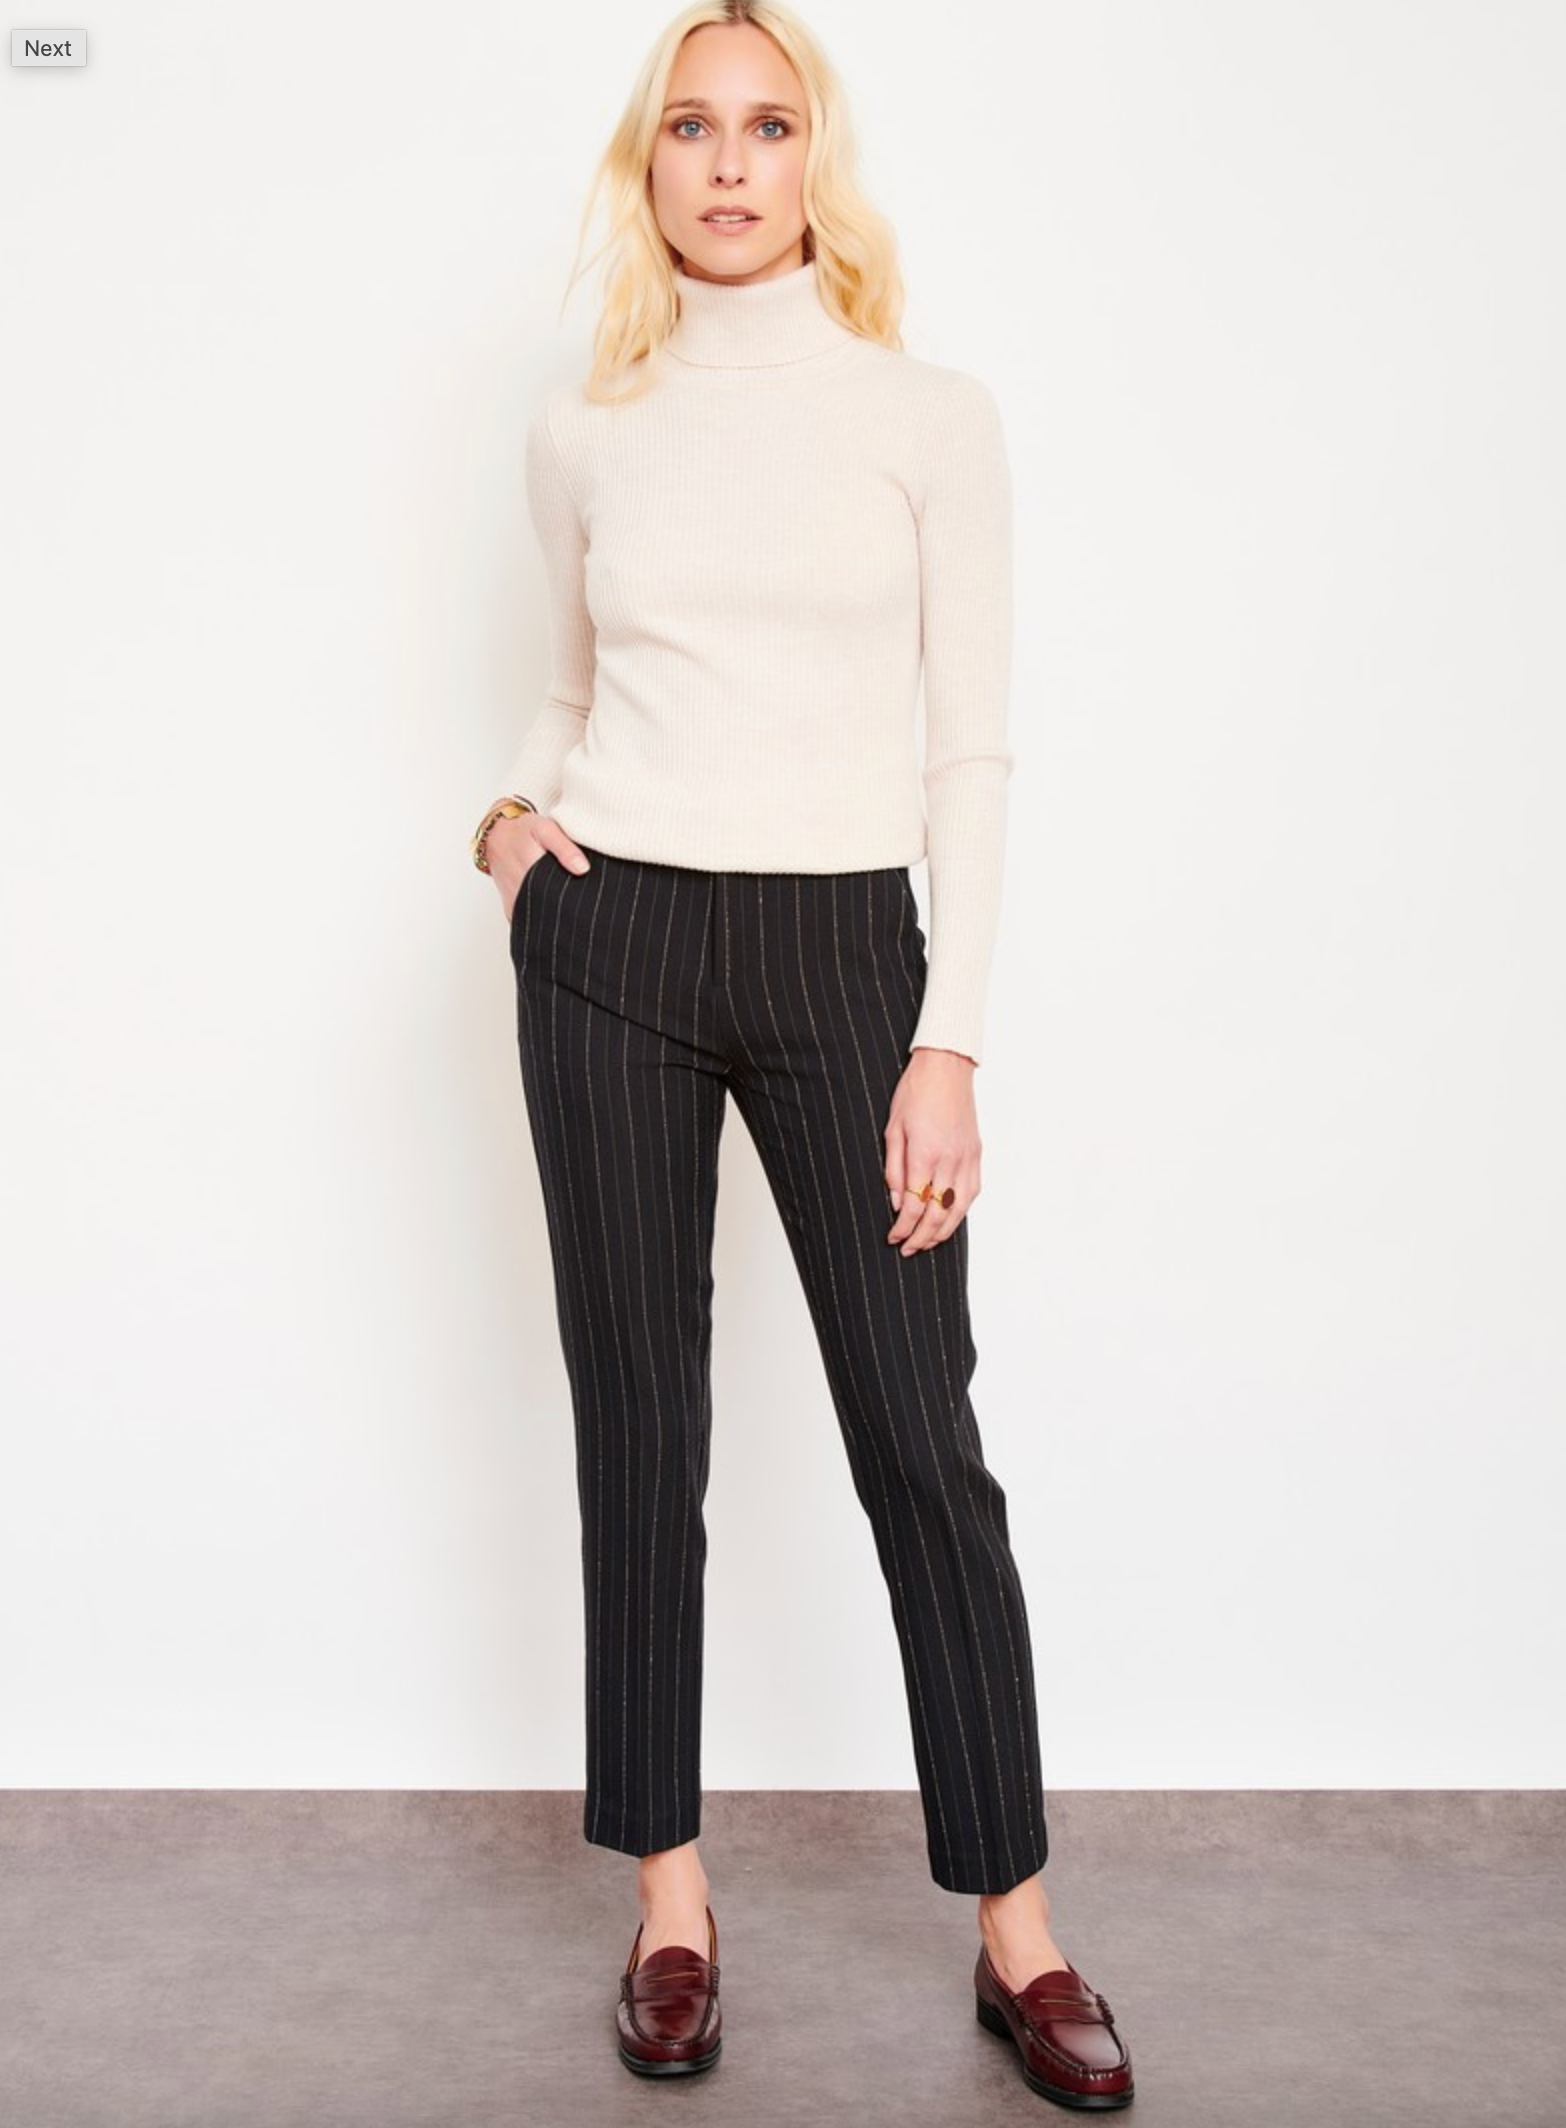 Striped Trousers For Women